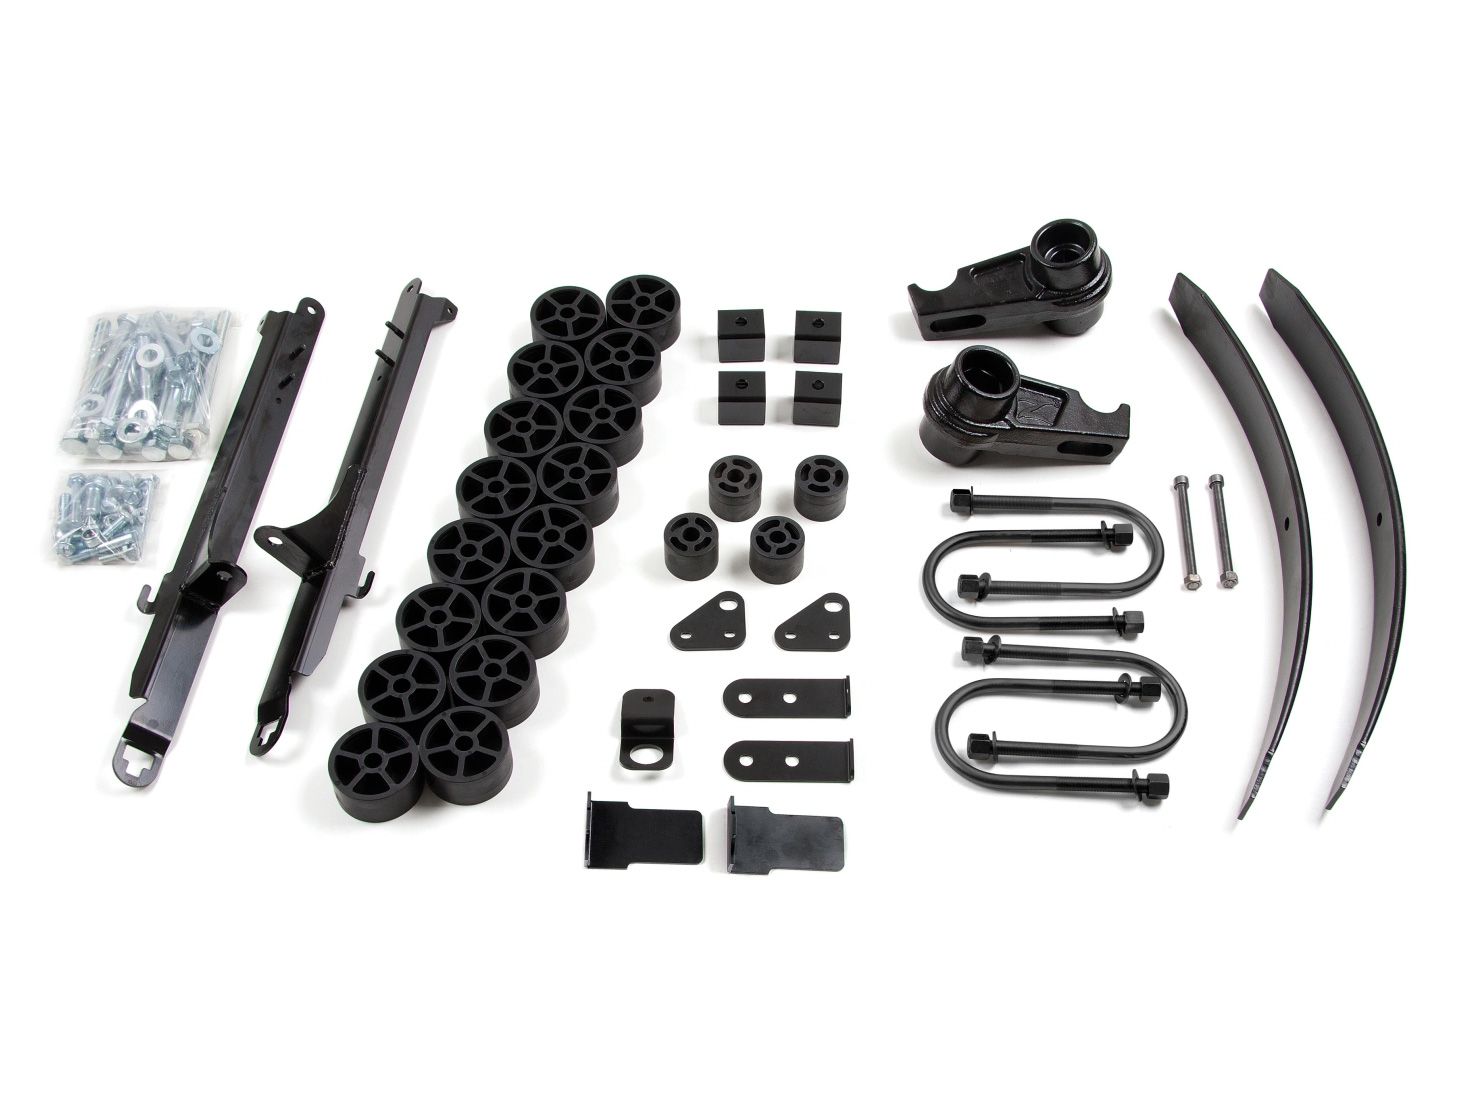 3.5" 2008-2012 Chevy Colorado 4WD Combo Lift Kit by Zone